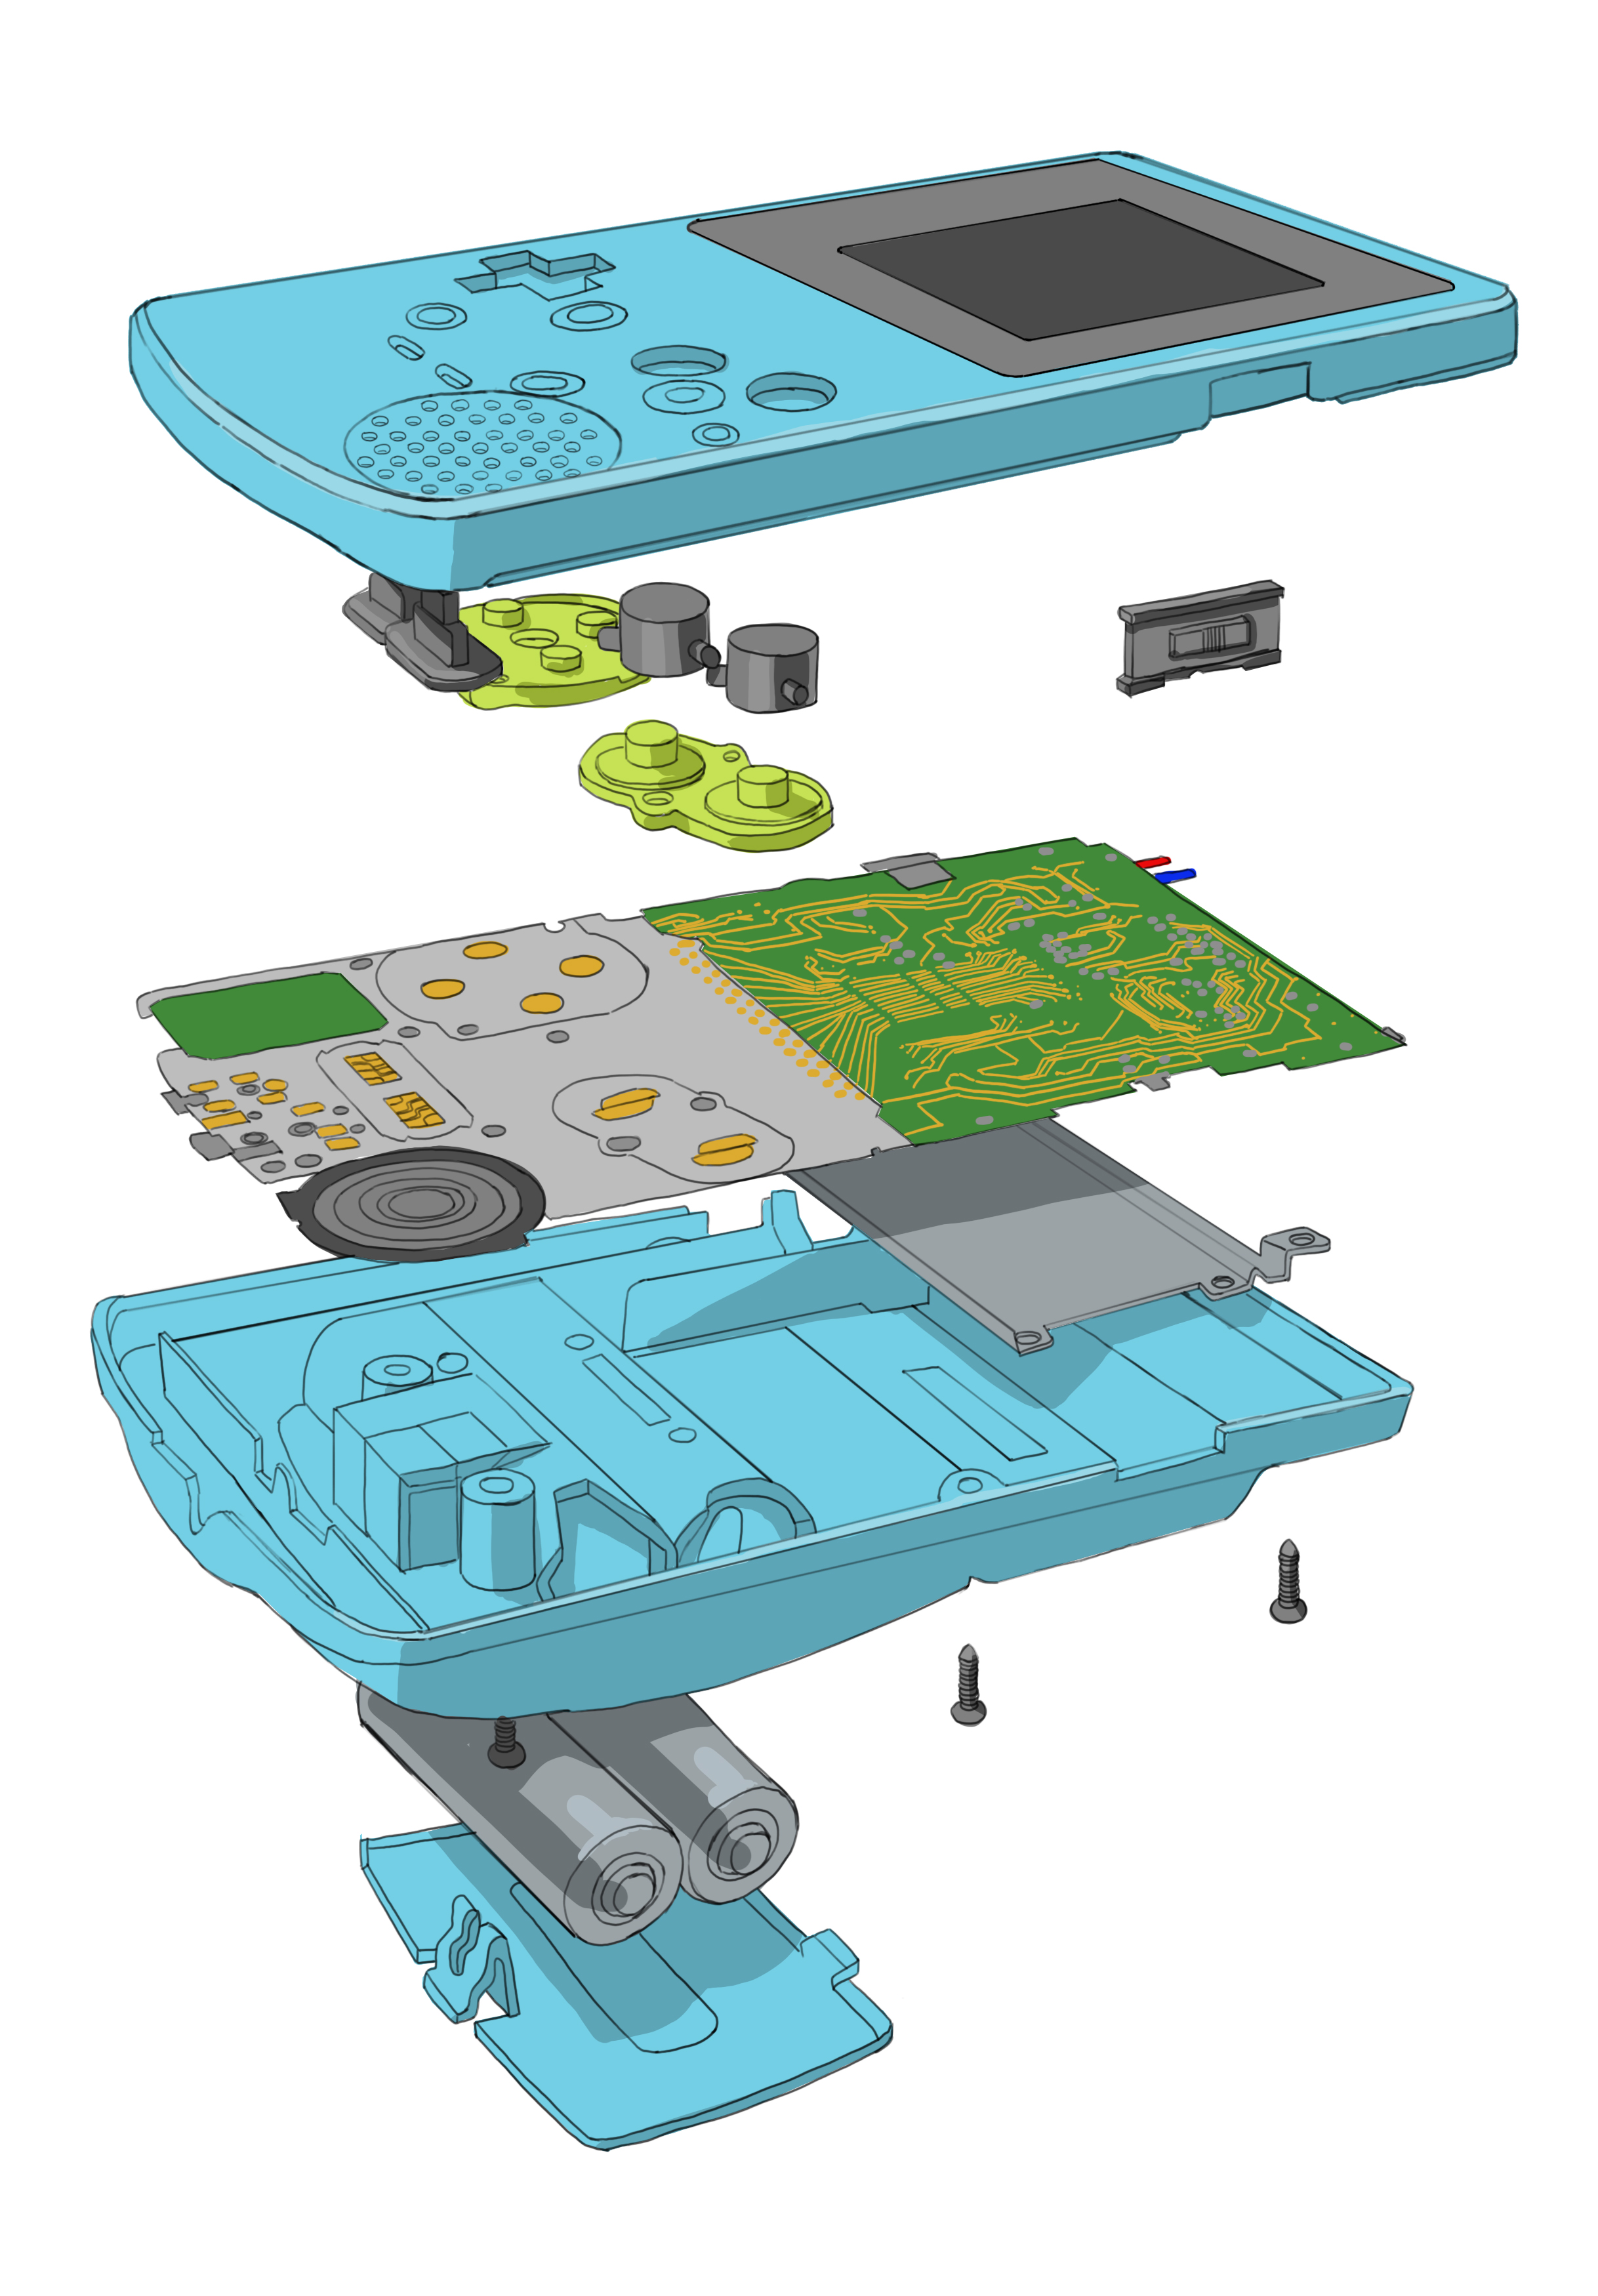 Game Boy Exploded View